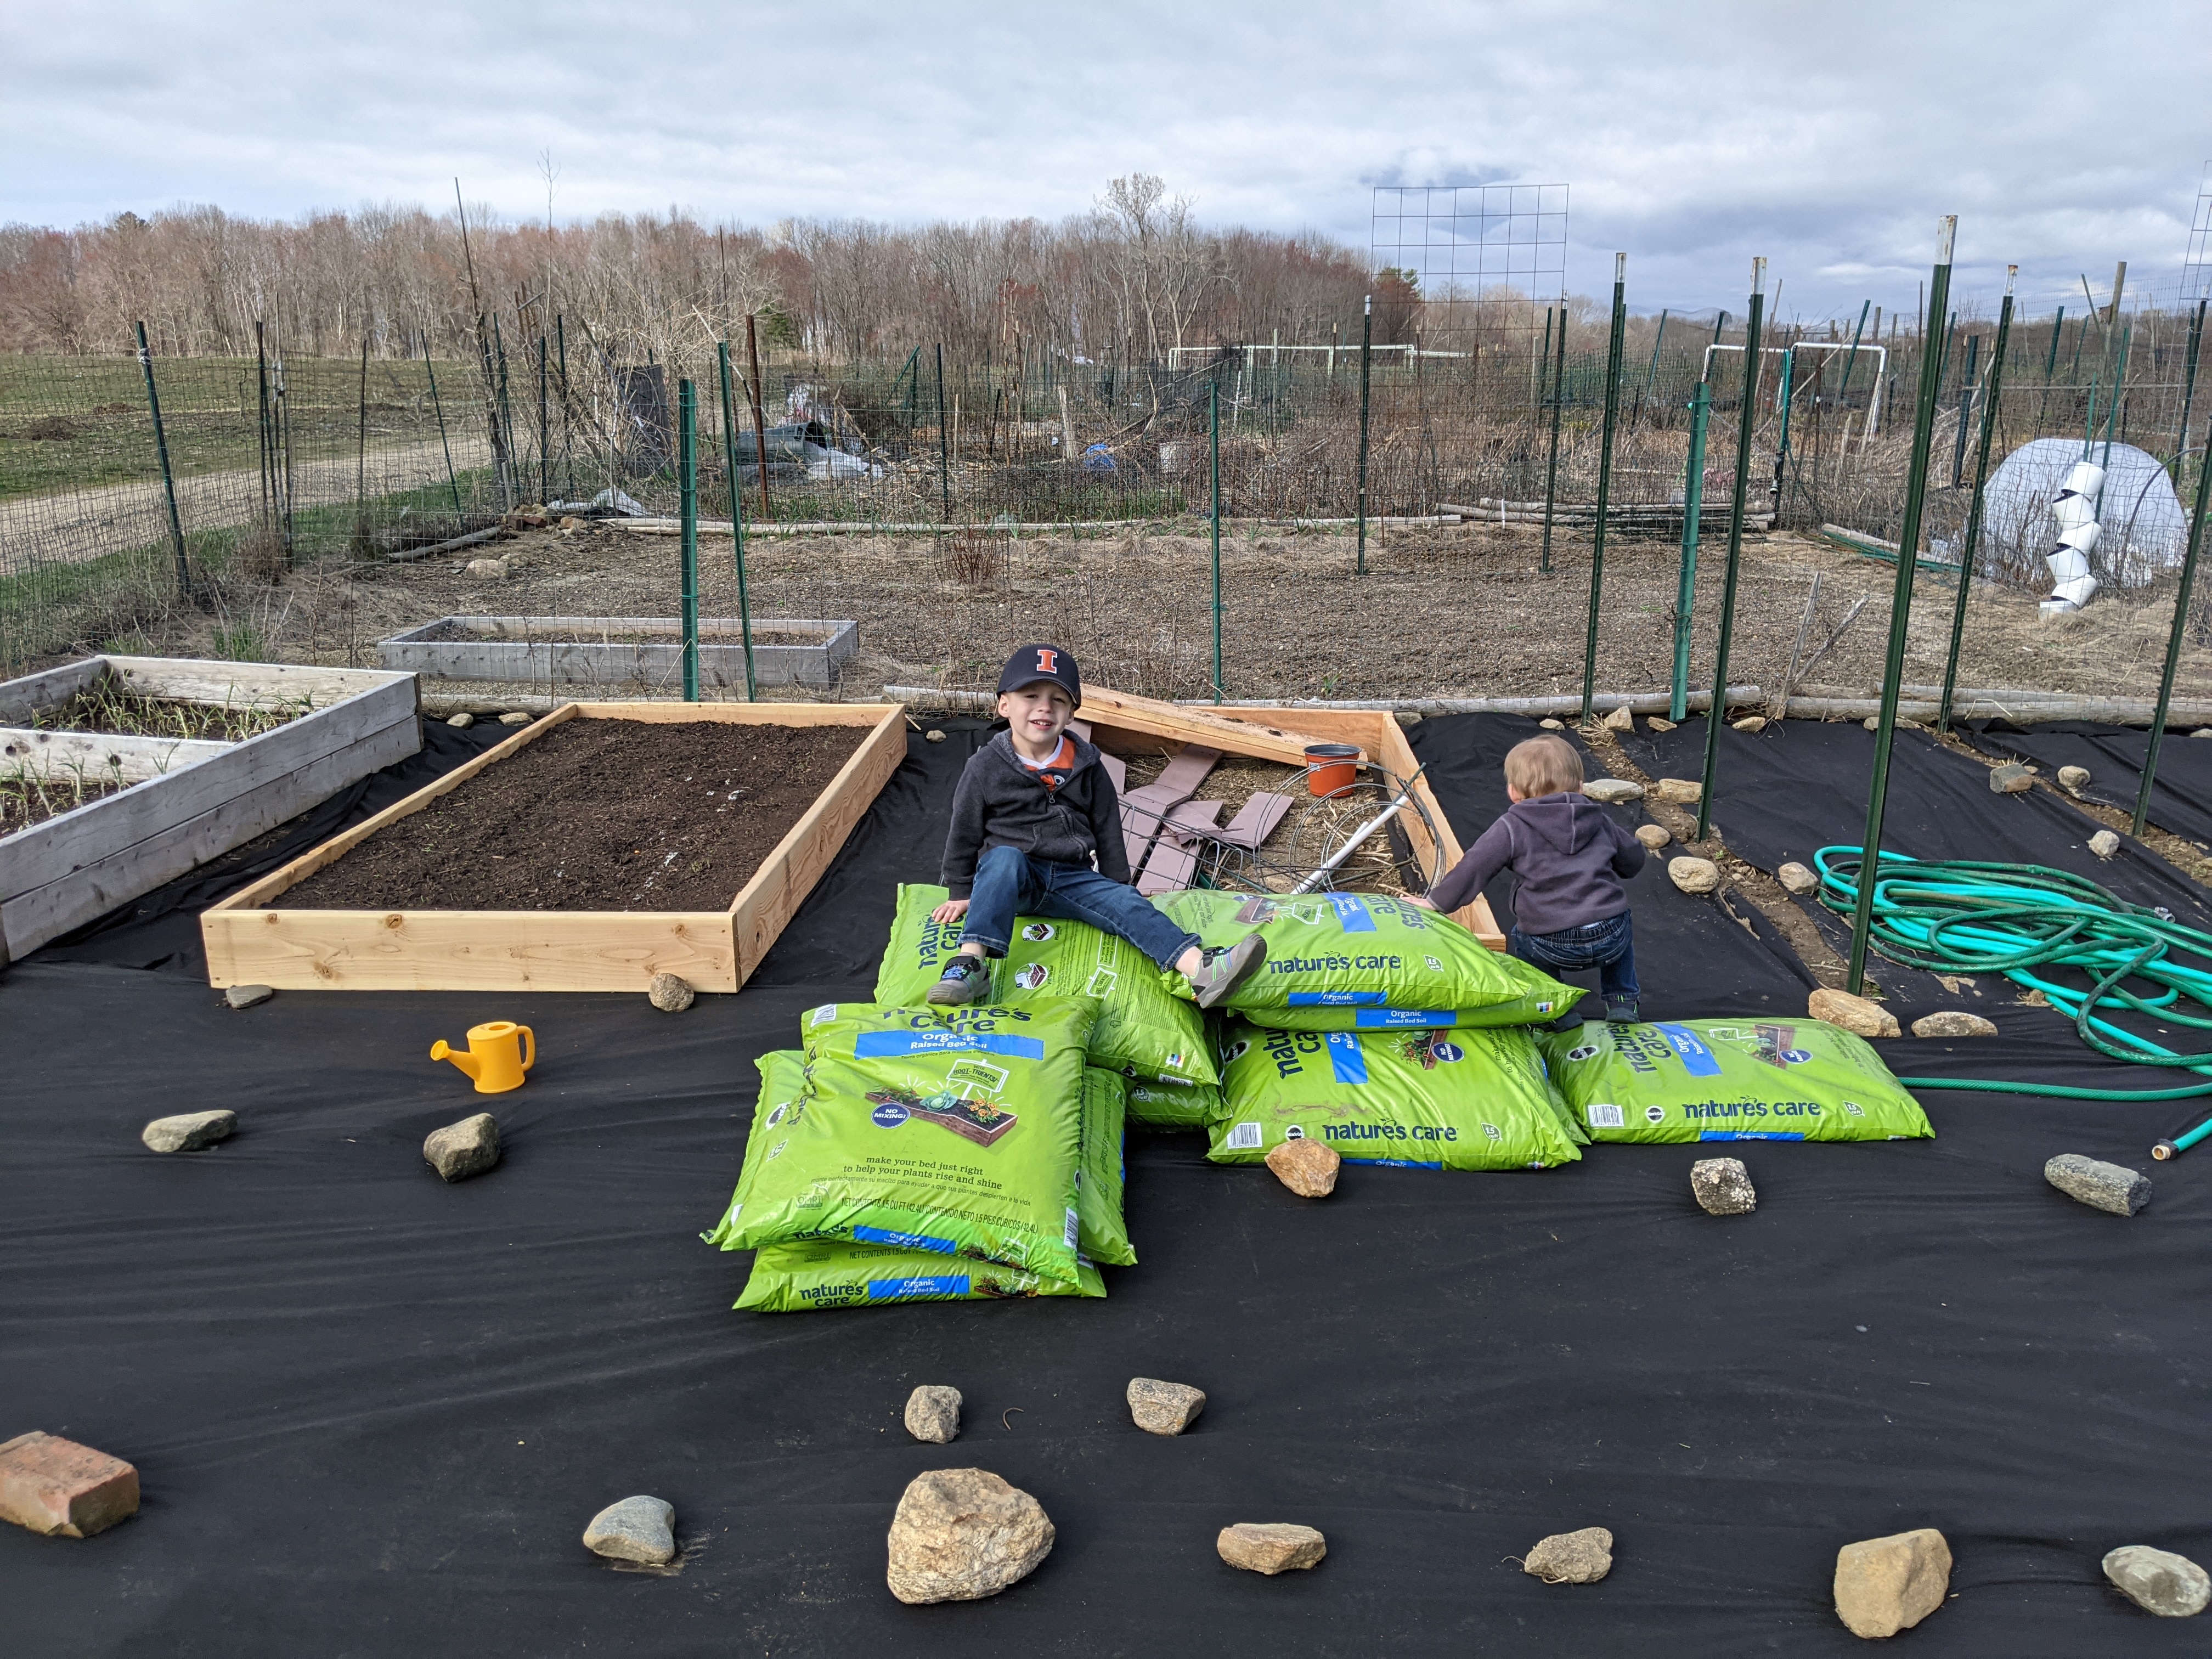 My kids having a great time climbing soil bags when I was setting up the garden.